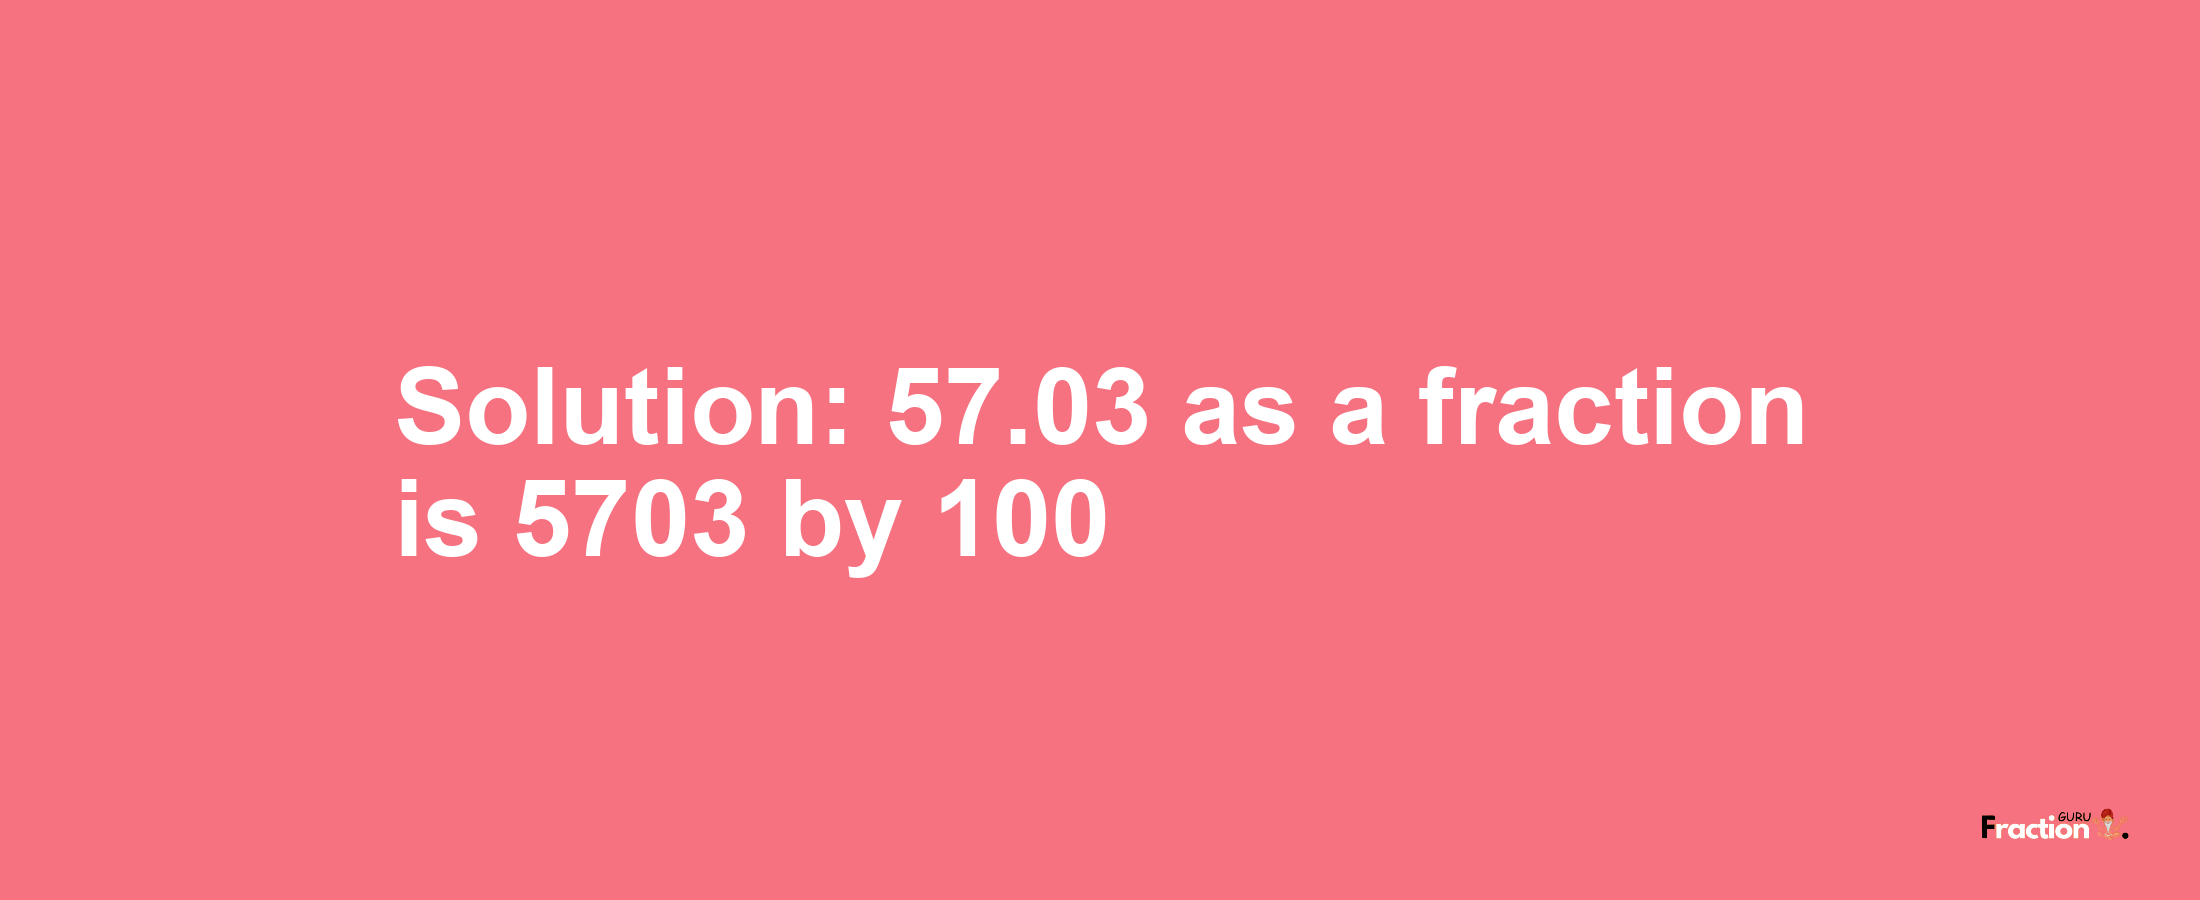 Solution:57.03 as a fraction is 5703/100